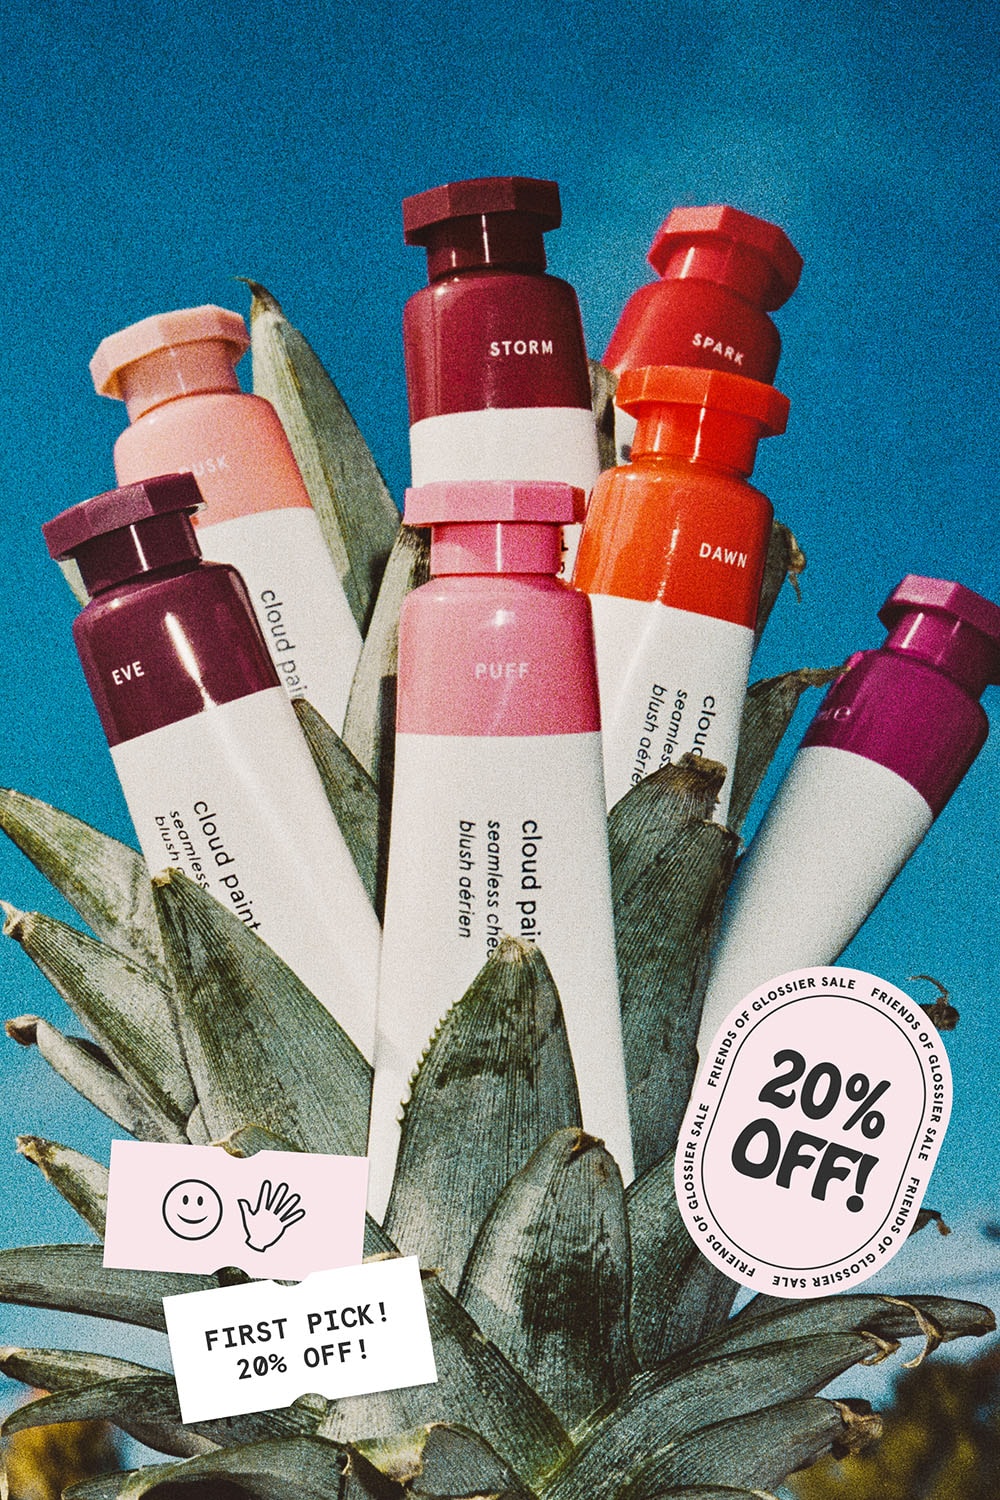 Friends of Glossier 20% Off Sale Announcement Weekend Mid-Year Lipstick Beauty Skincare Makeup